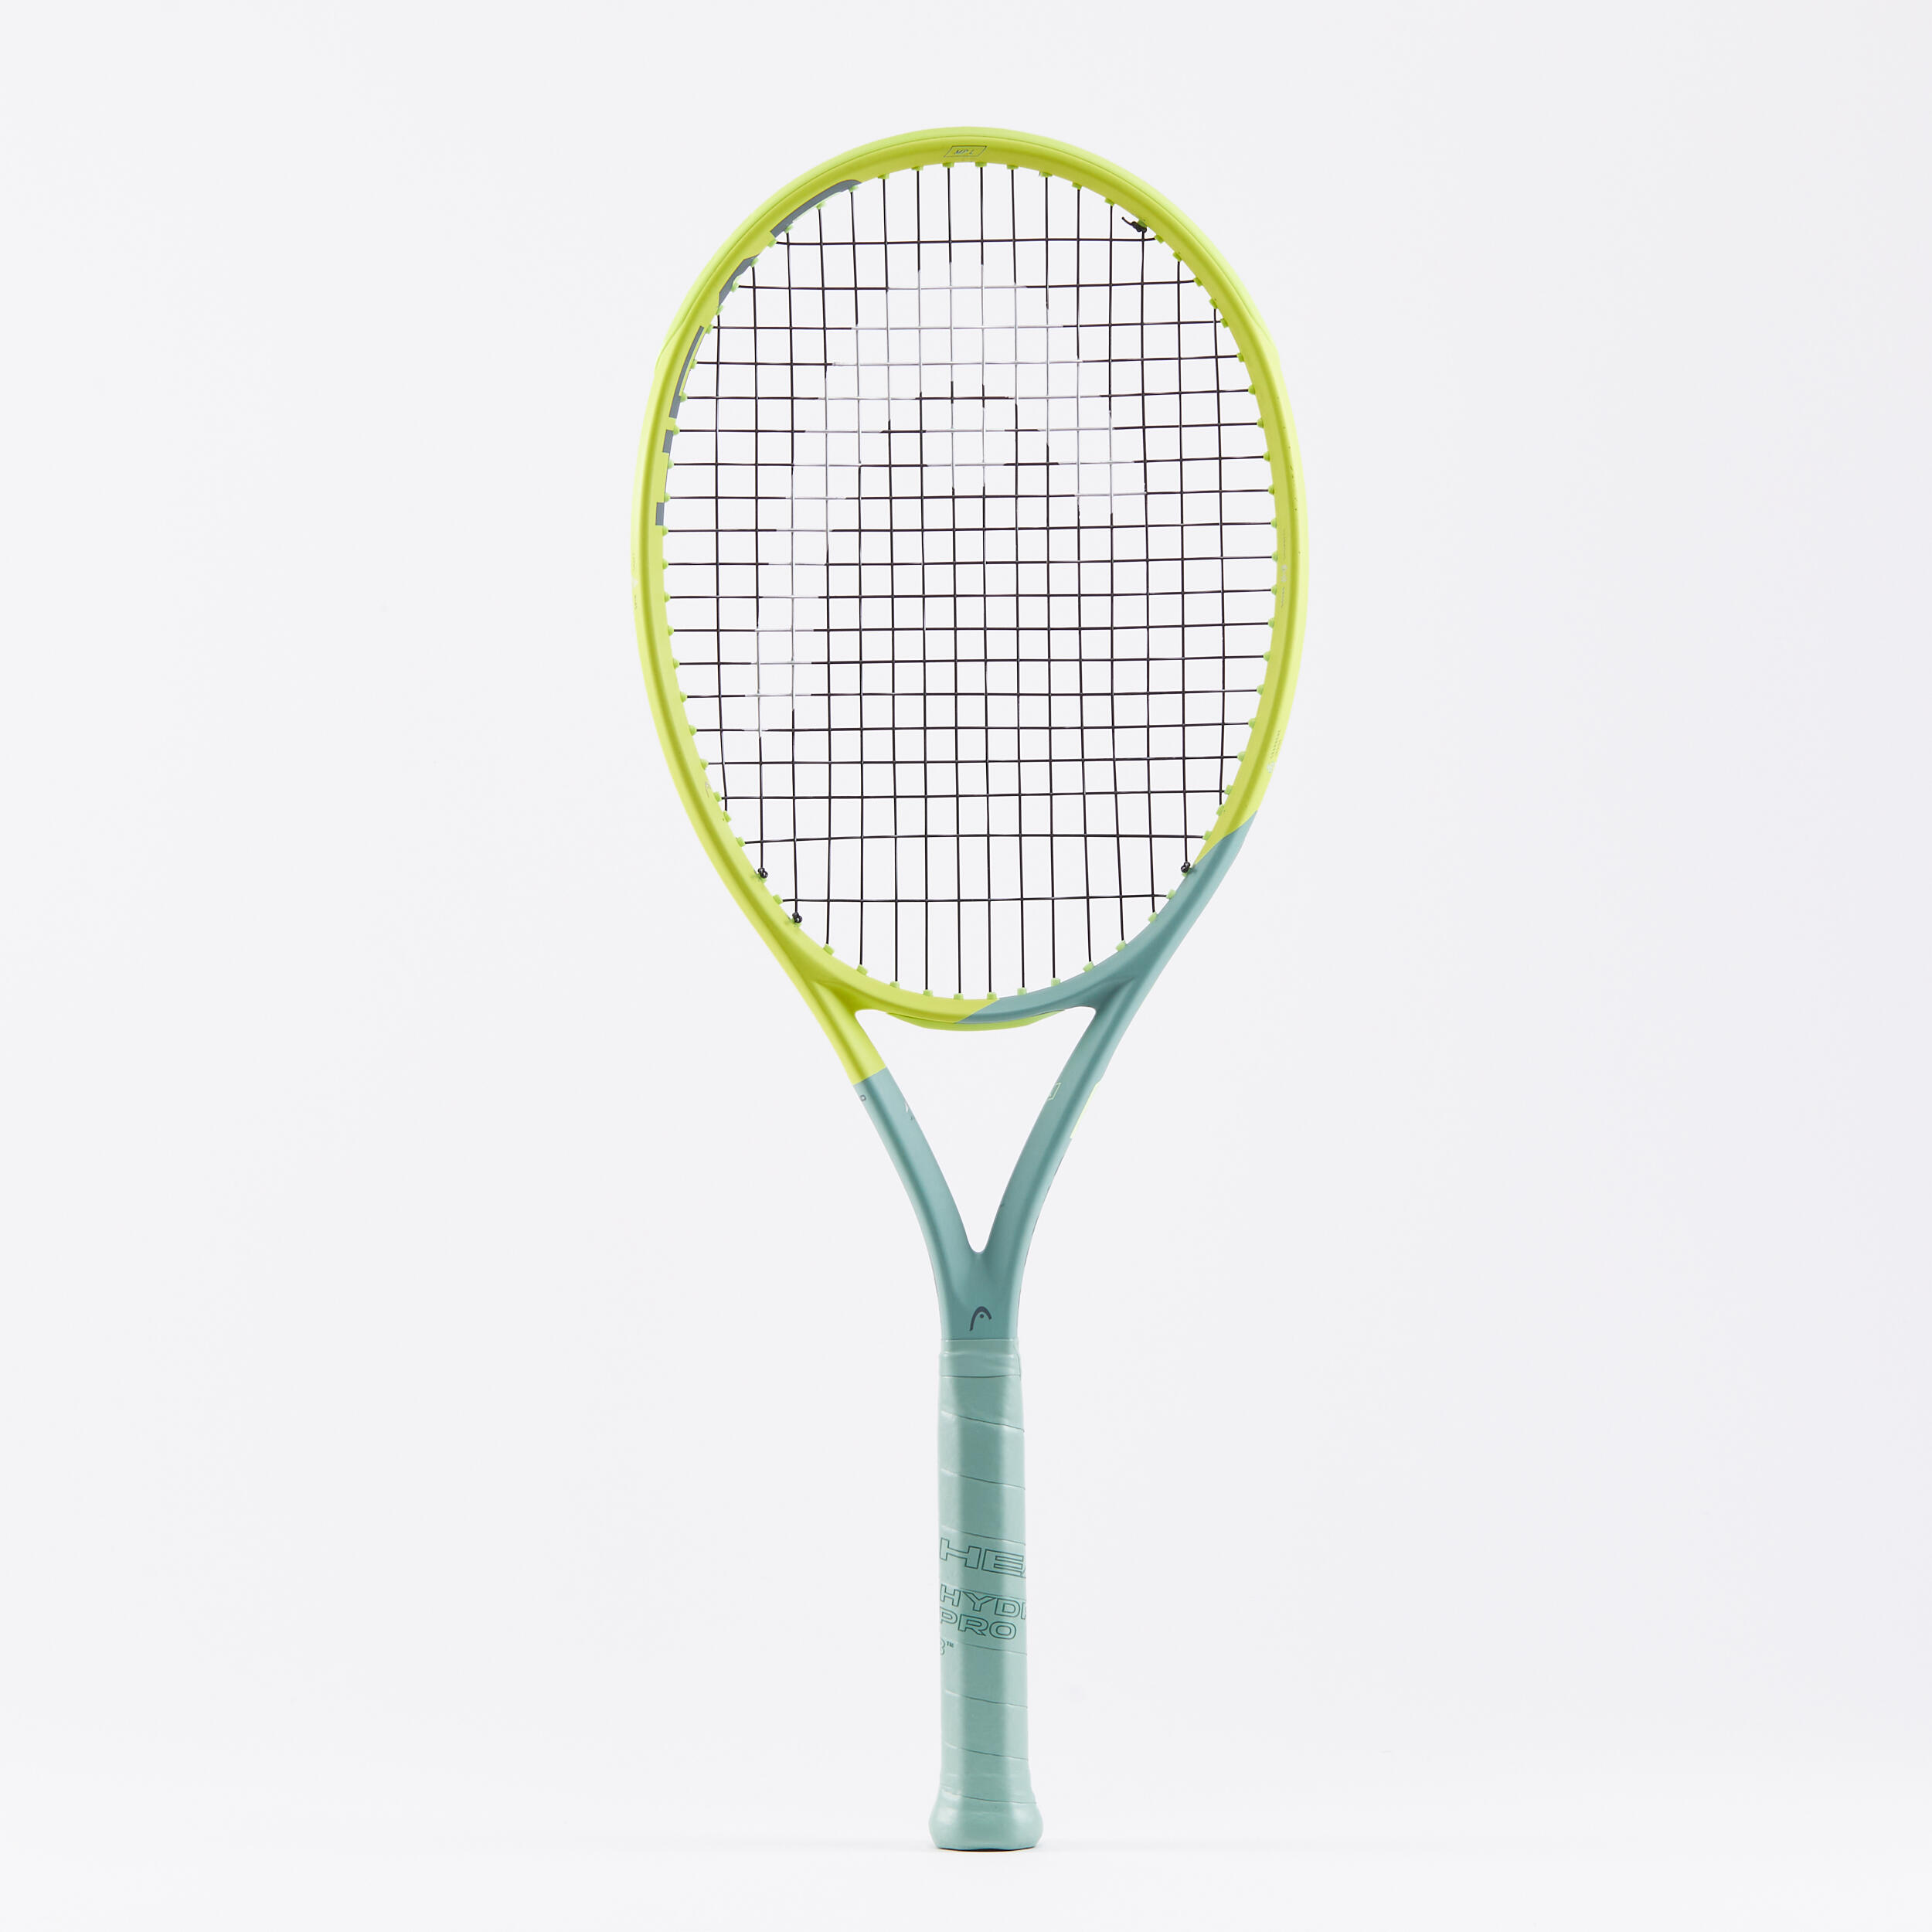 Photos - Tennis Racquet Head Adult Tennis Racket Auxetic Extreme Mp Lite 285 G - Grey/yellow 